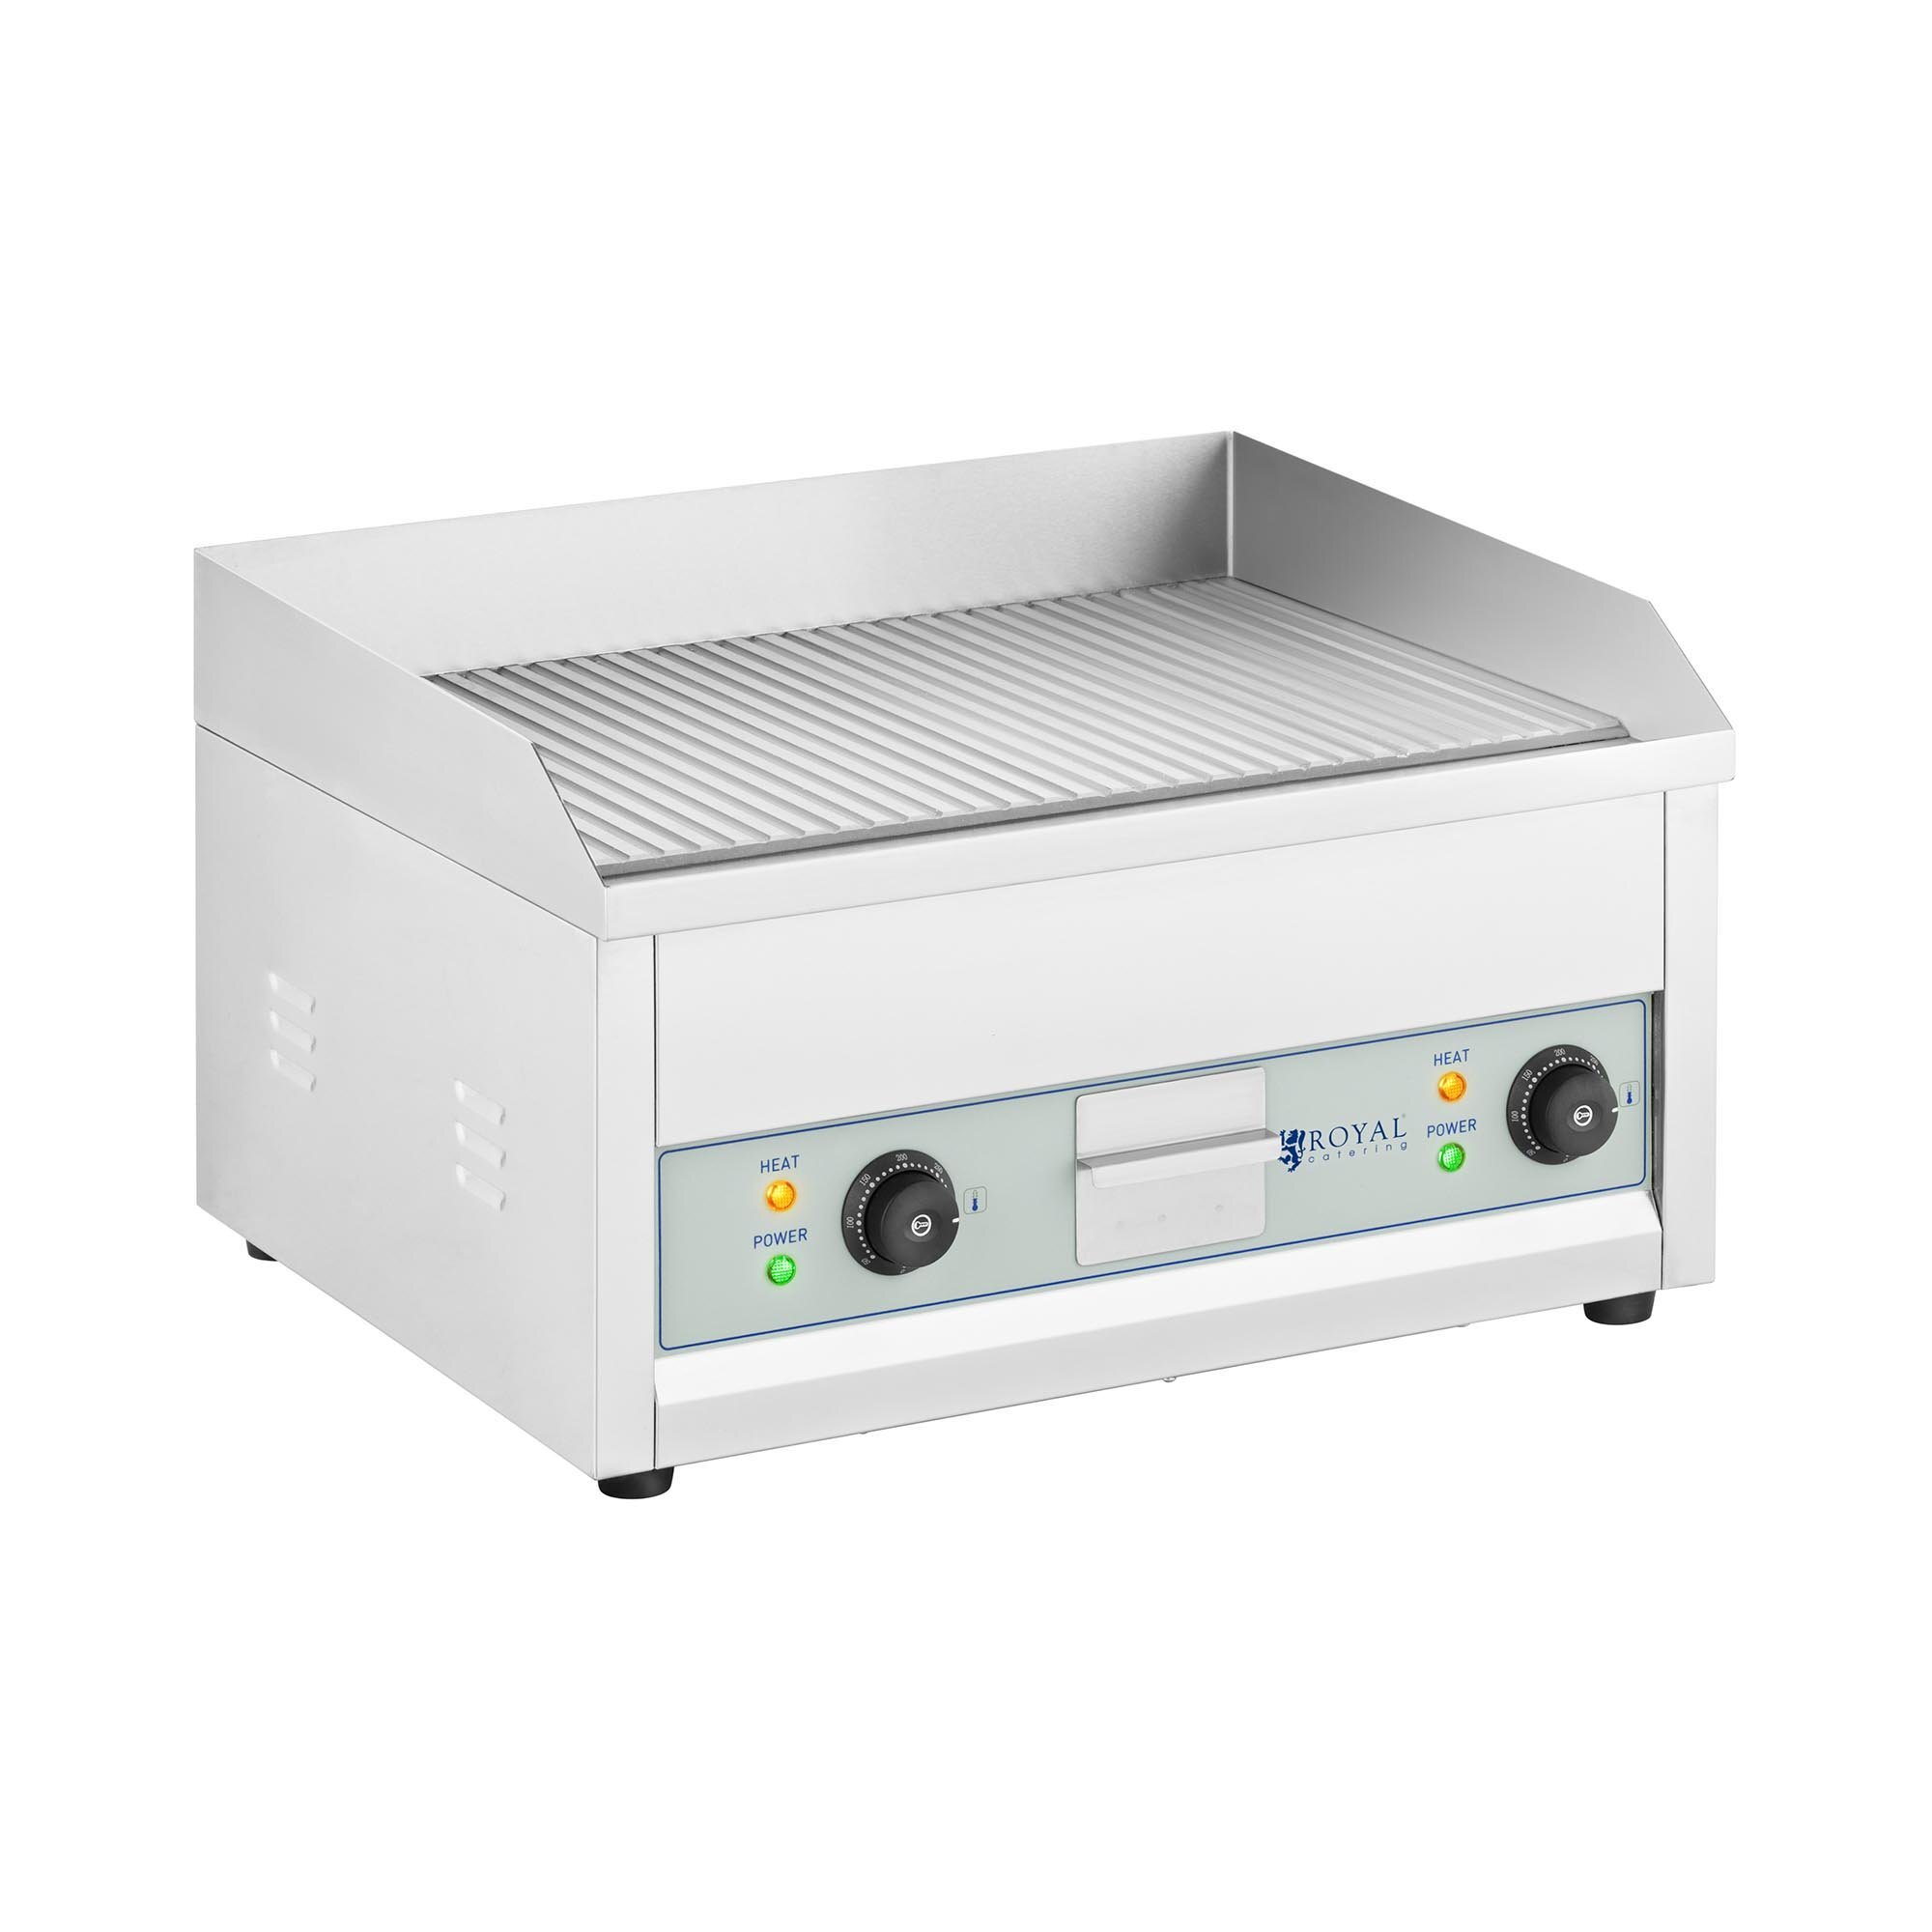 Royal Catering Dubbel - Elektrische grill - 600 x 400 mm - royal_catering - 2 x 2500 W